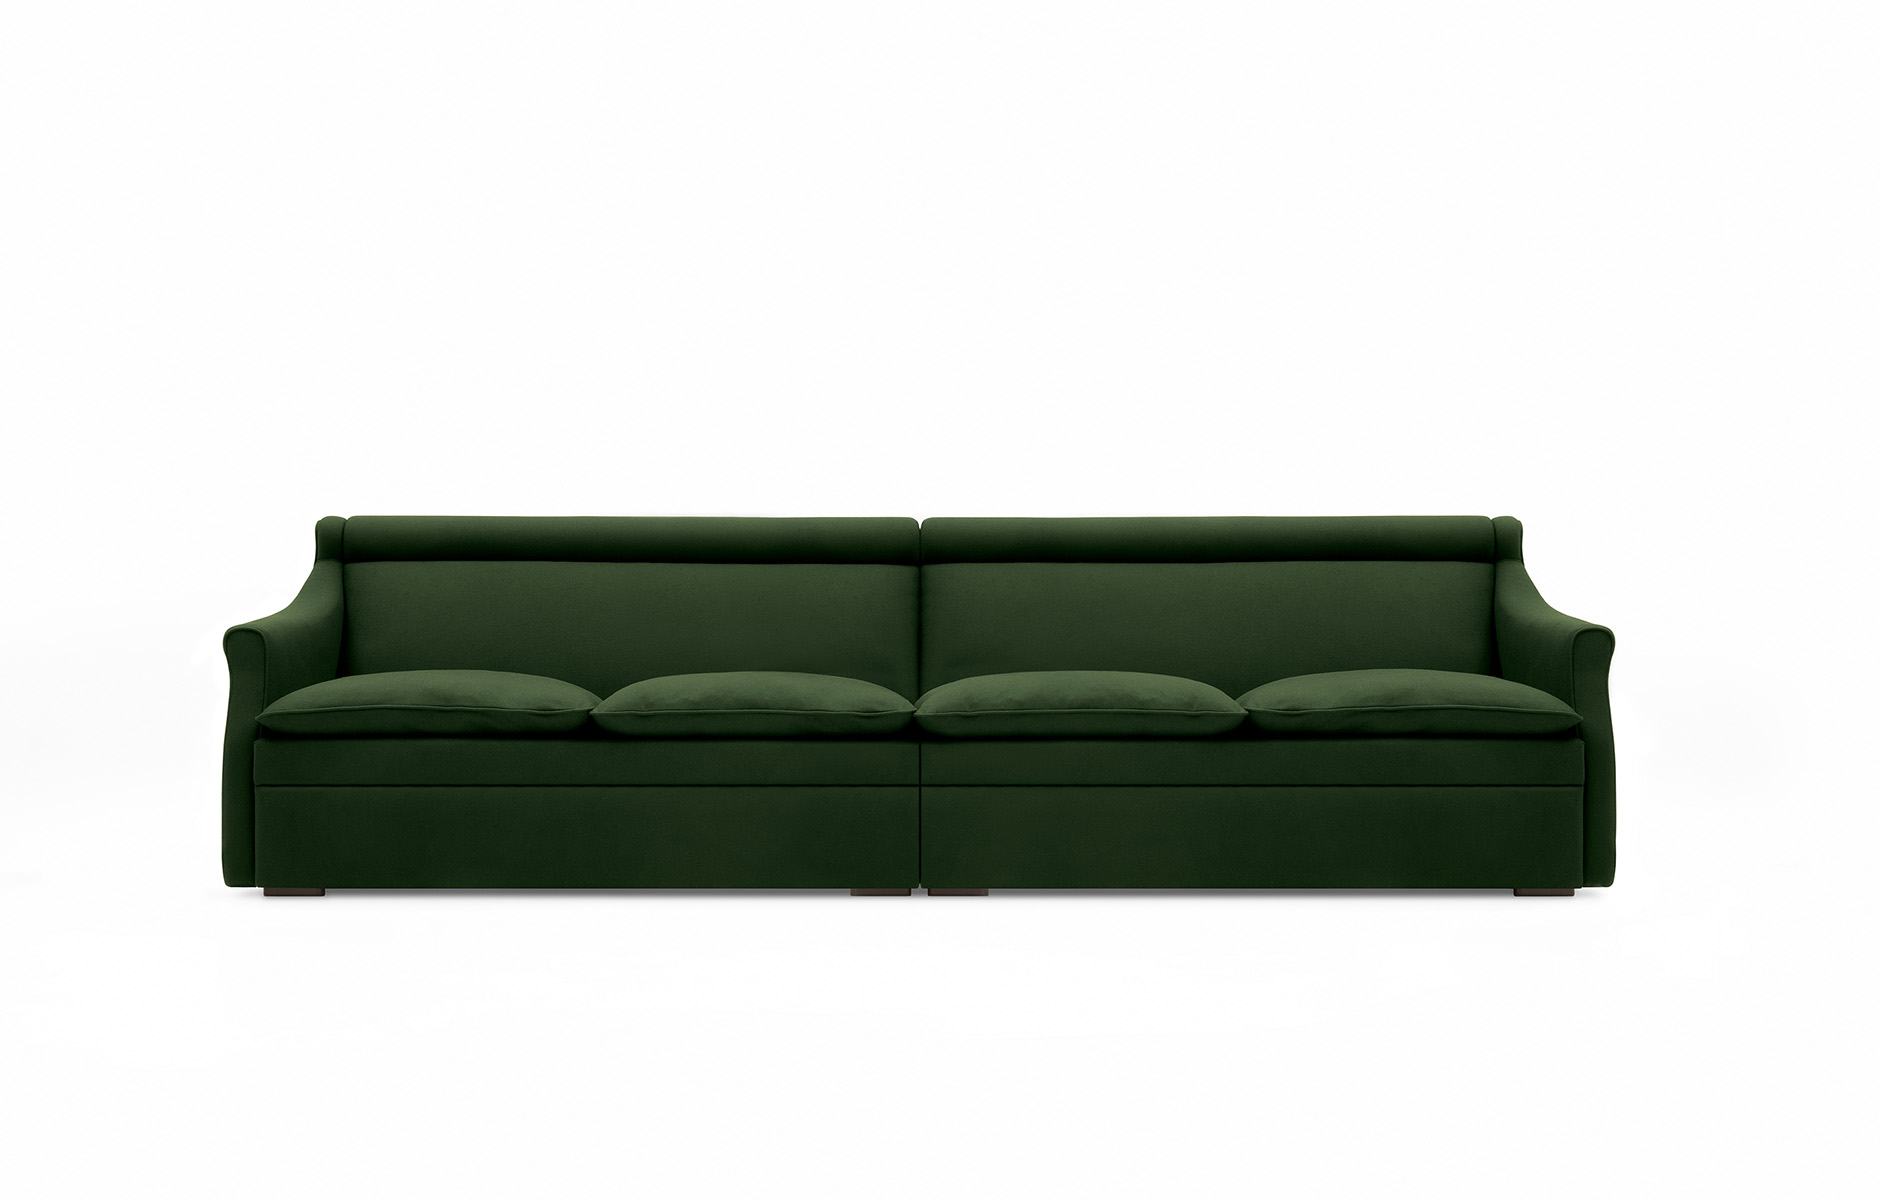 The classic San Siro sofa designed by Luigi Caccia Dominioni in 1967 has been relaunched by Azucena, the brand founded by the architect  in the 1960s. Photo c/o Azucena. 